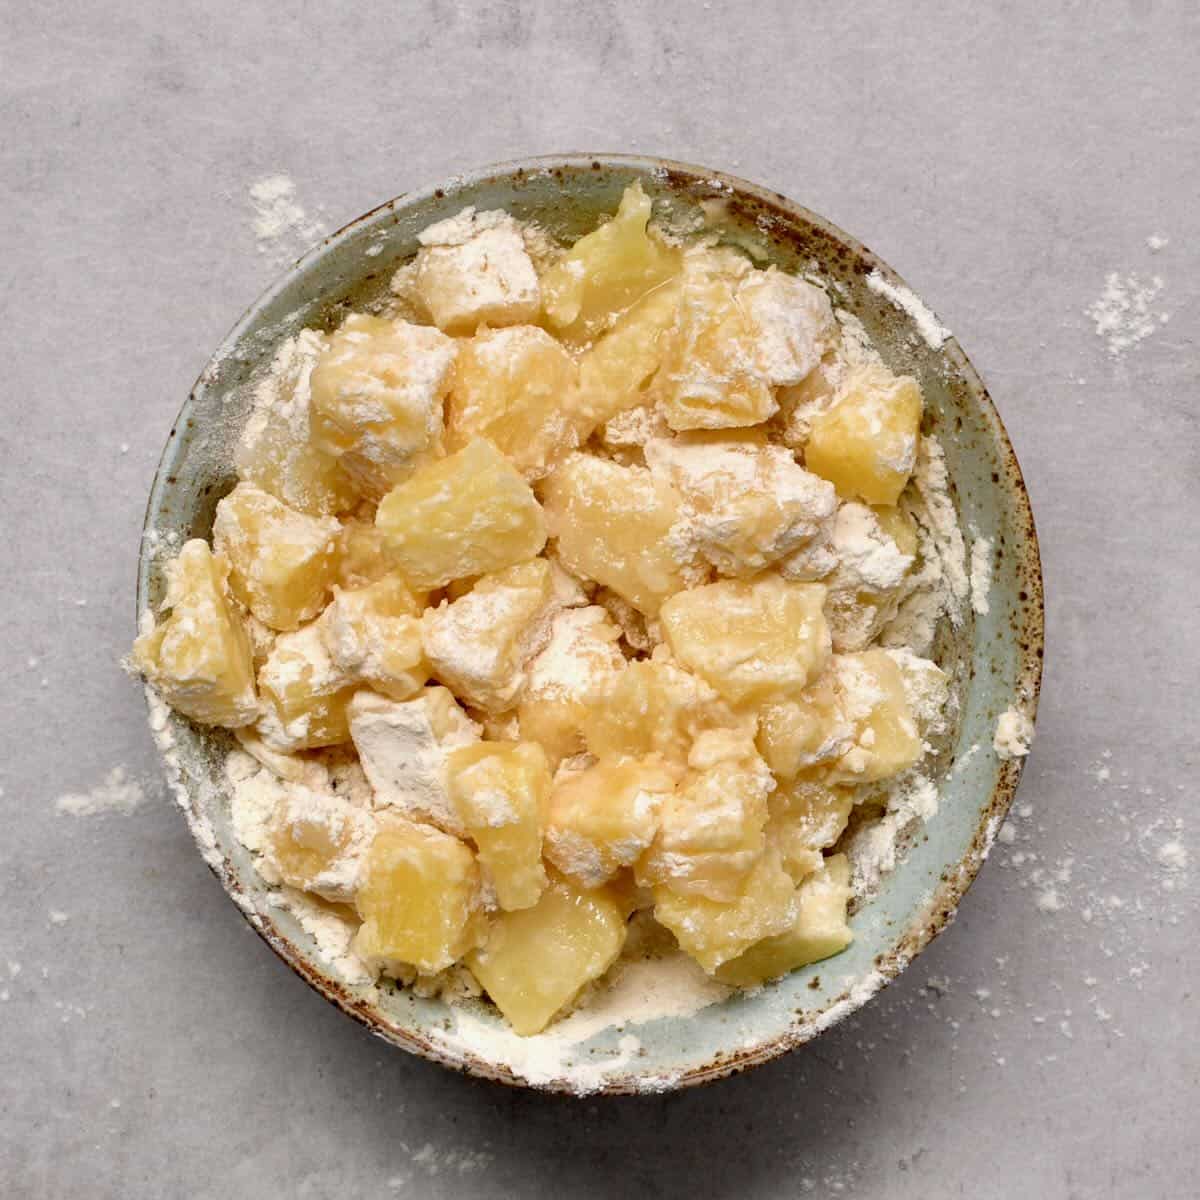 Pineapple chunks mixed with sugar and flour